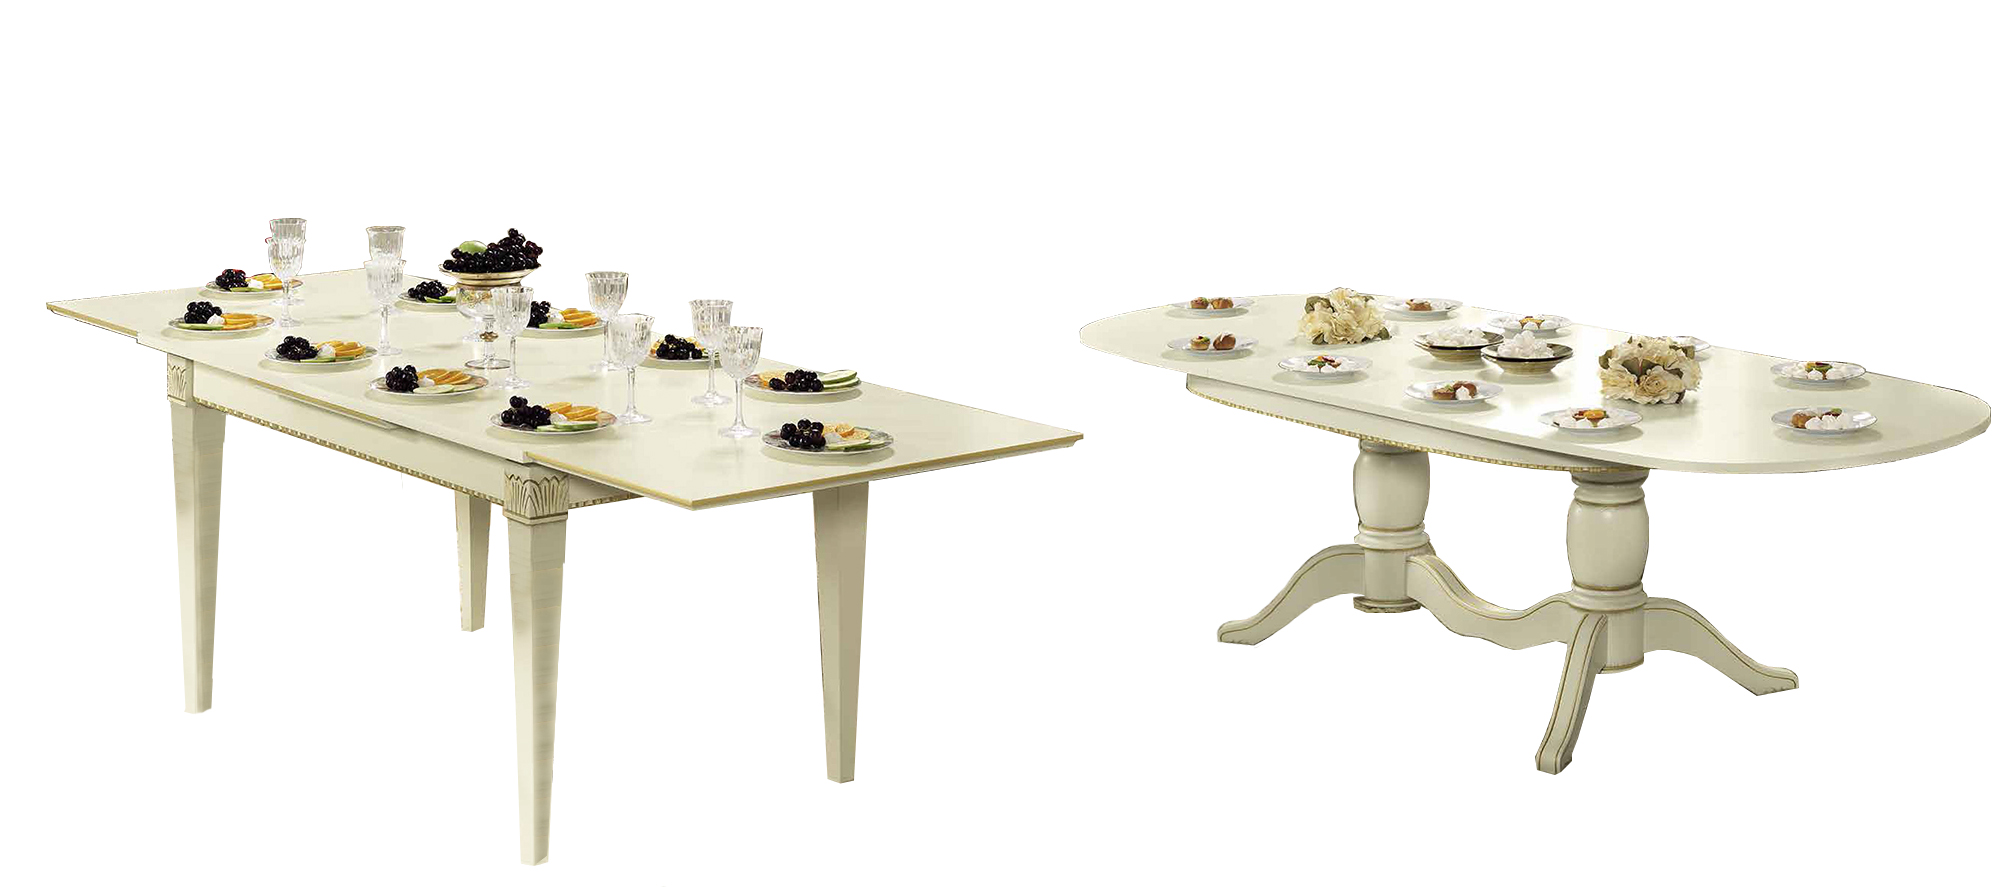 Brands Camel Gold Collection, Italy Treviso White Ash Tables